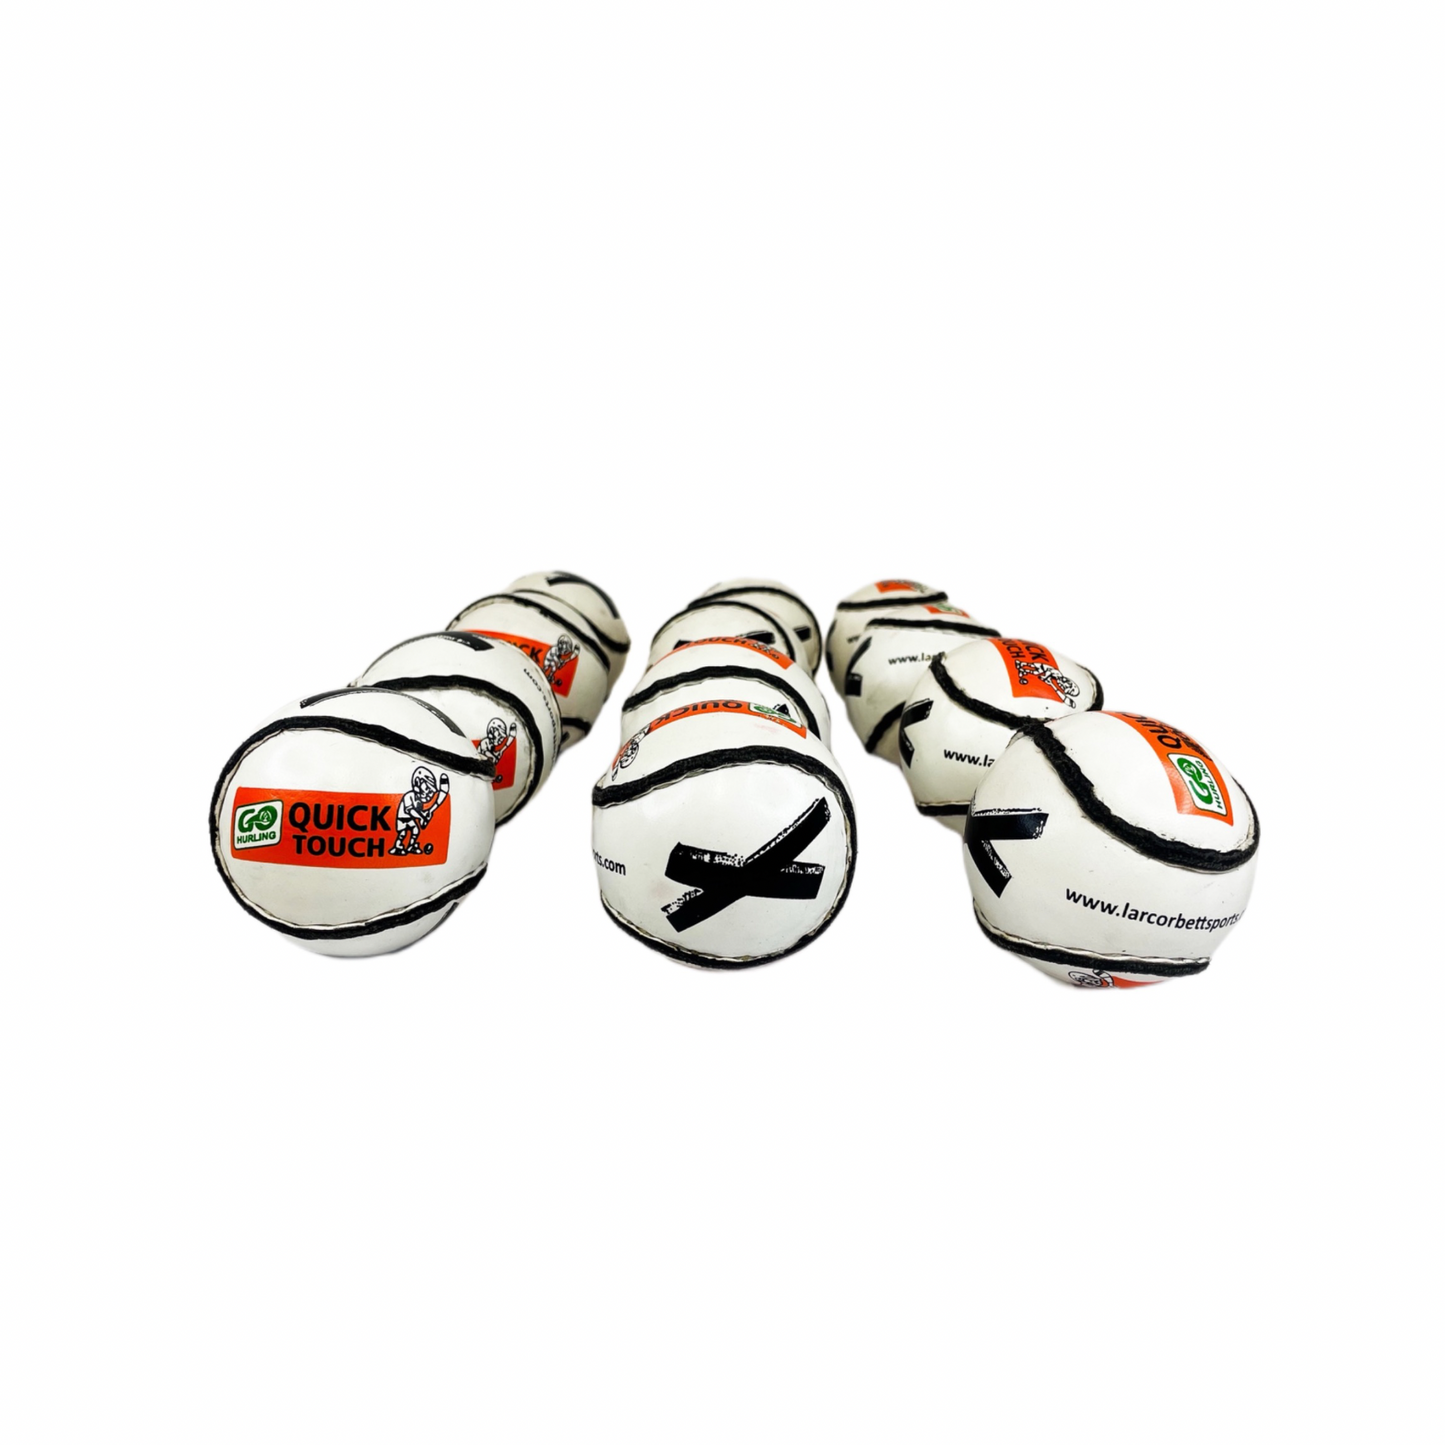 Quick Touch Sliotar - 12 Pack